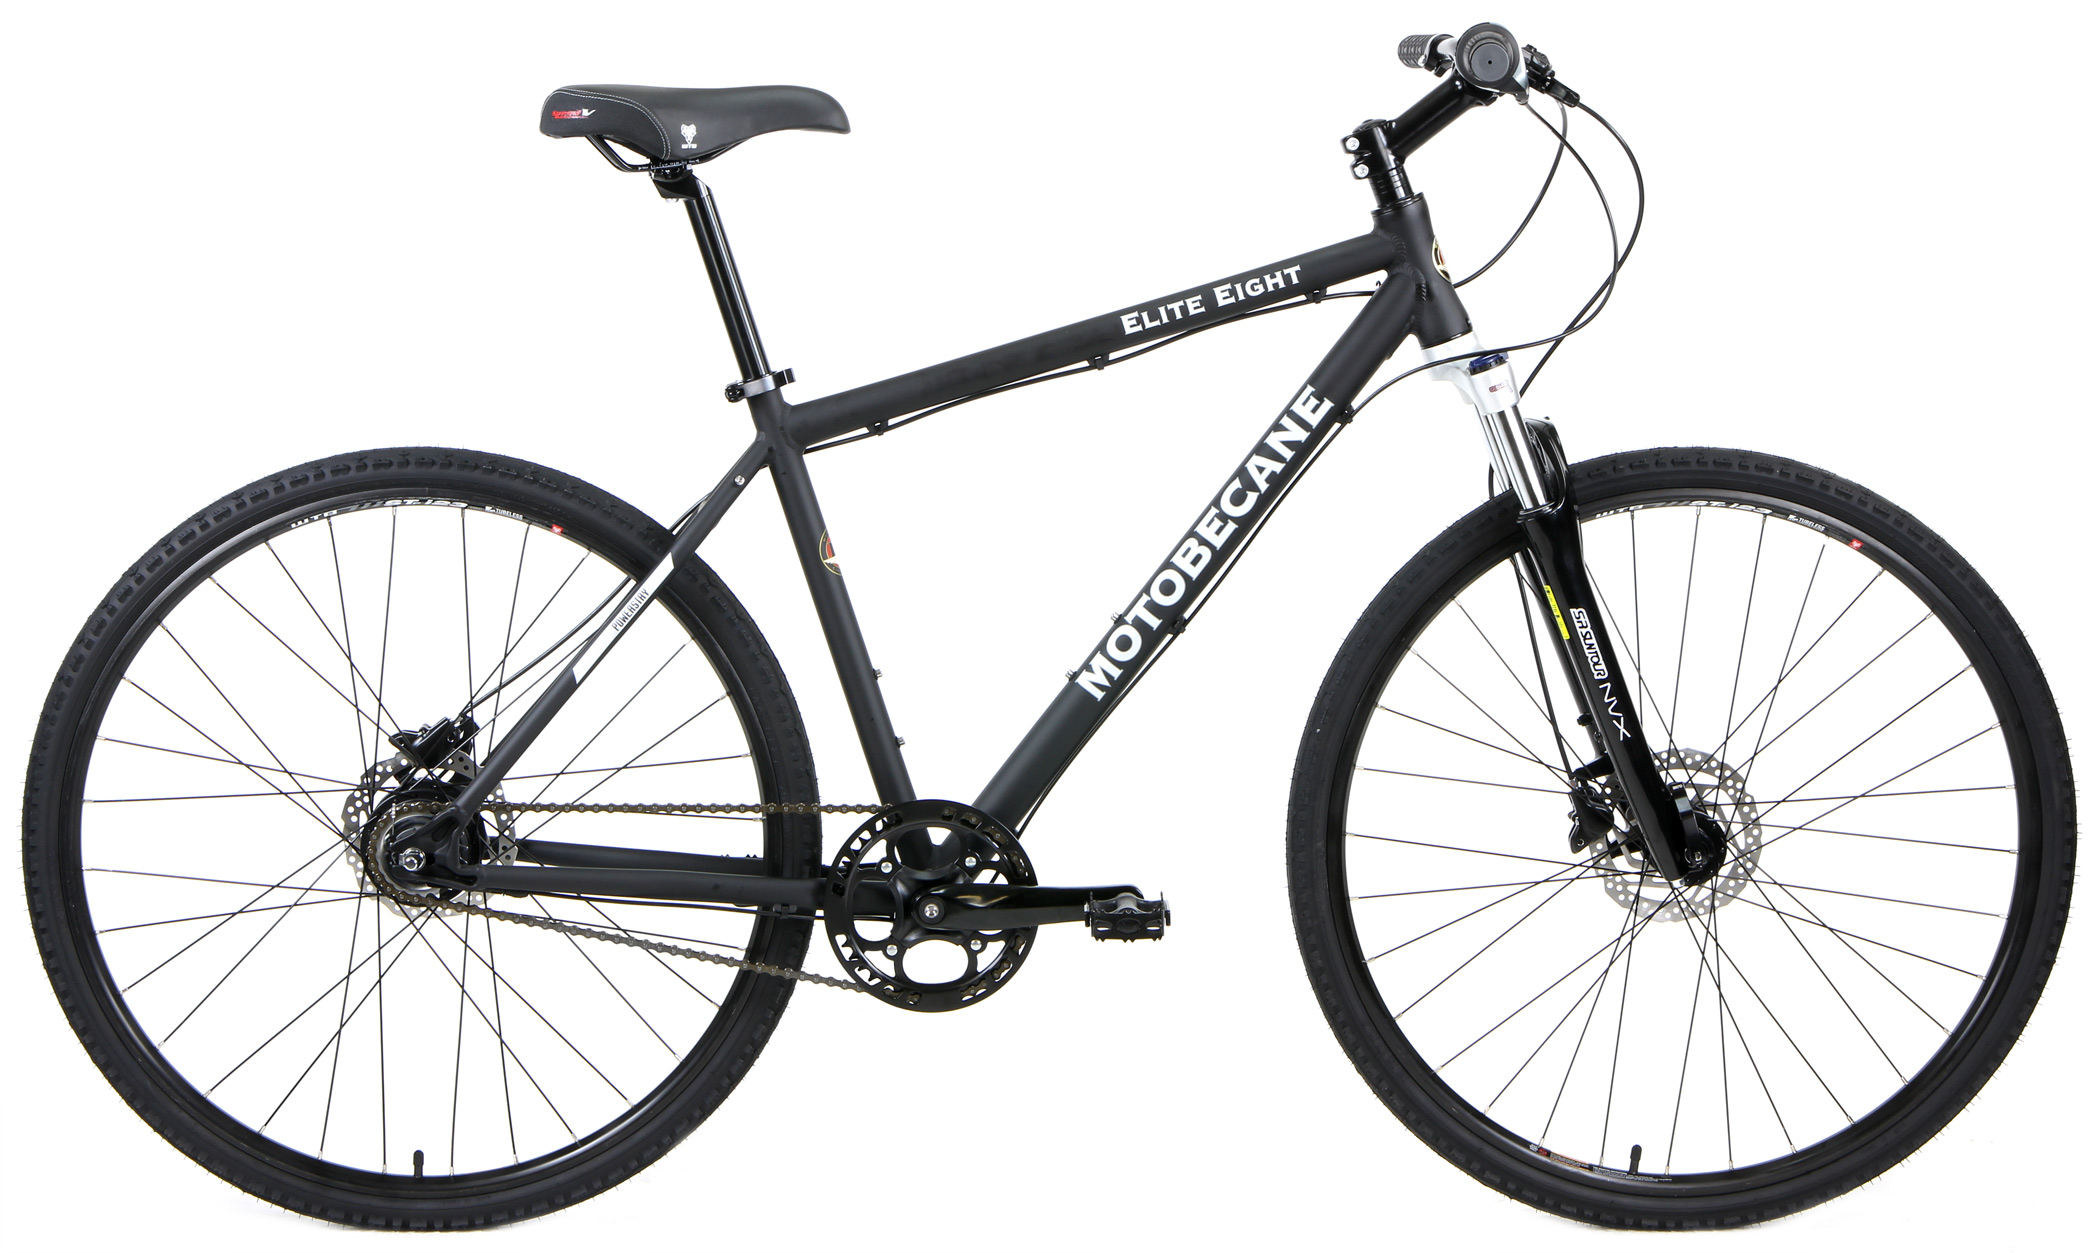 kickstand for 29er with disc brakes